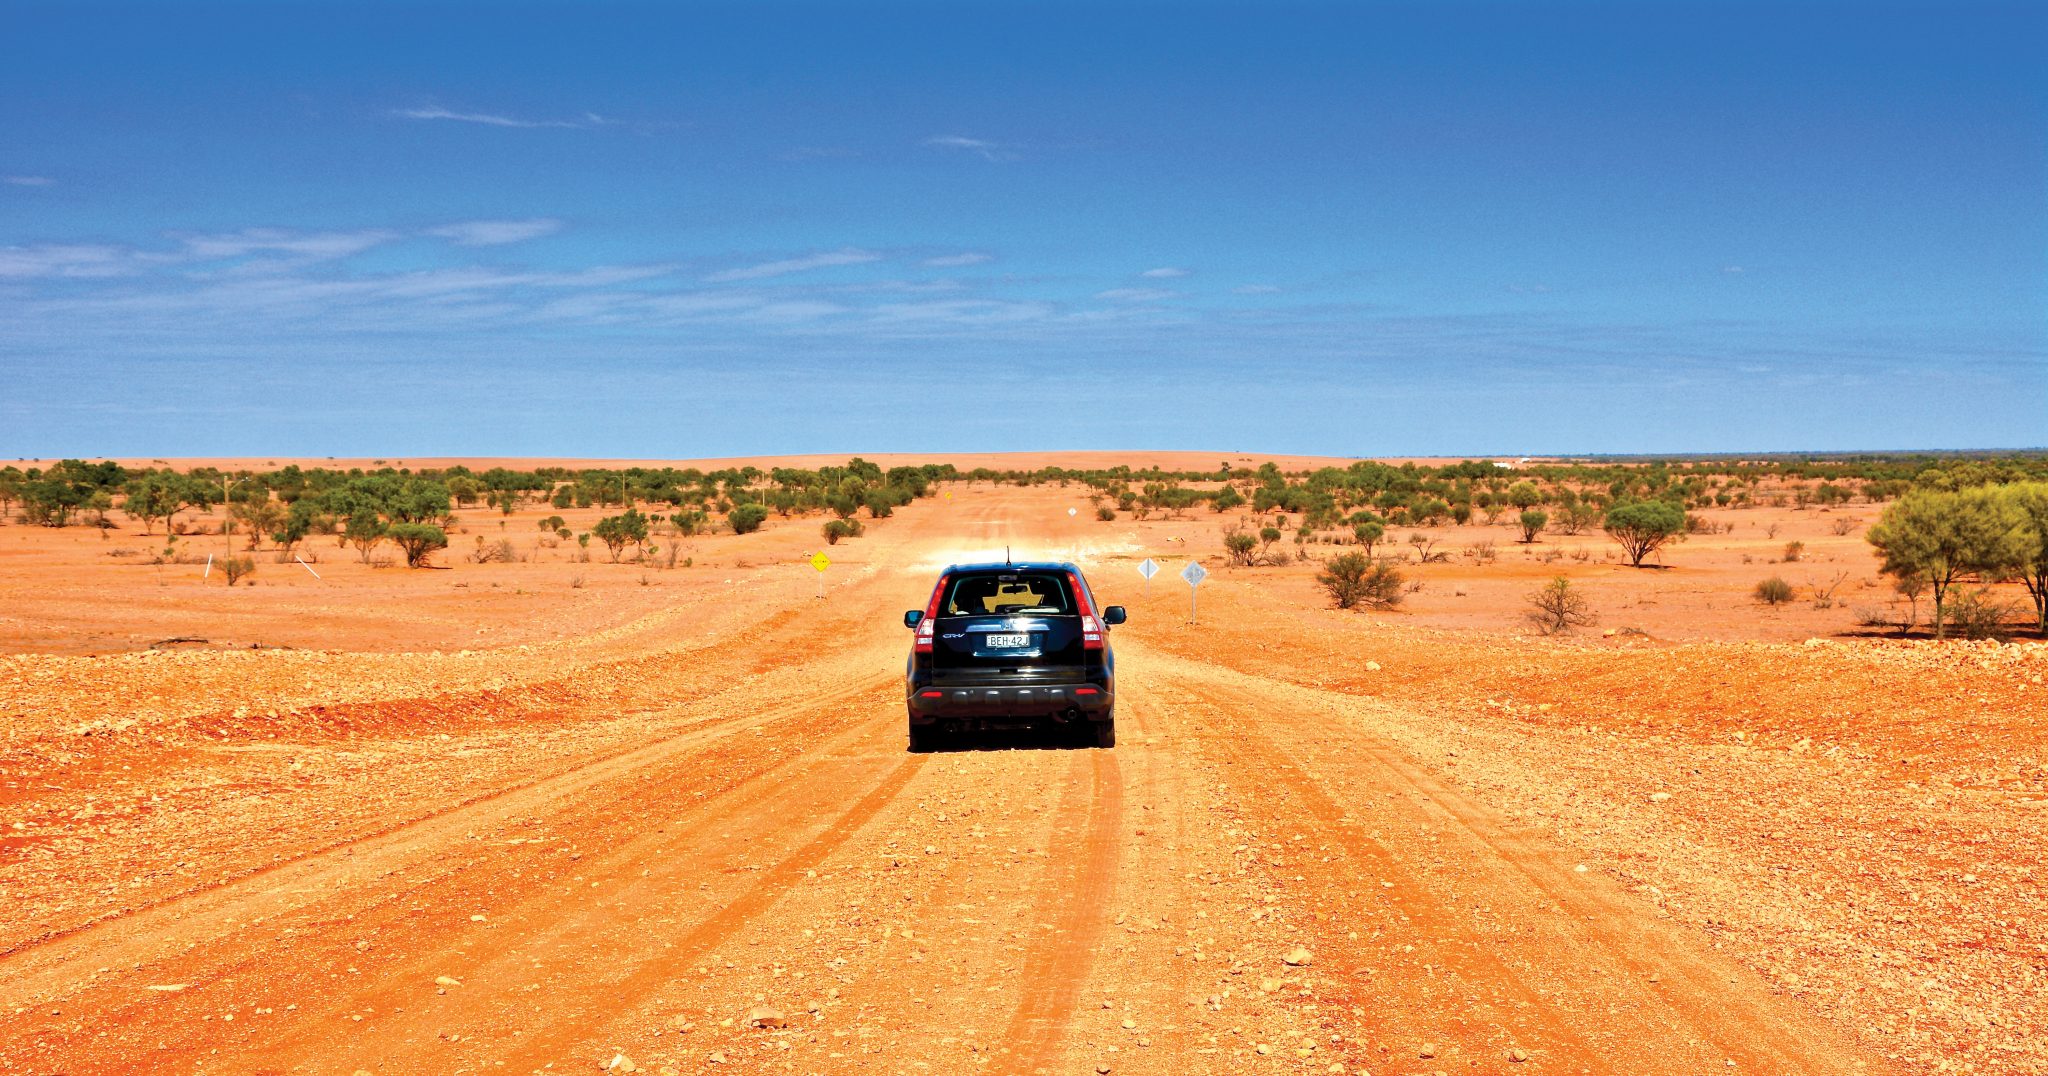 Australia's Outback: Red Roads and 55+ Lifestyle Magazine